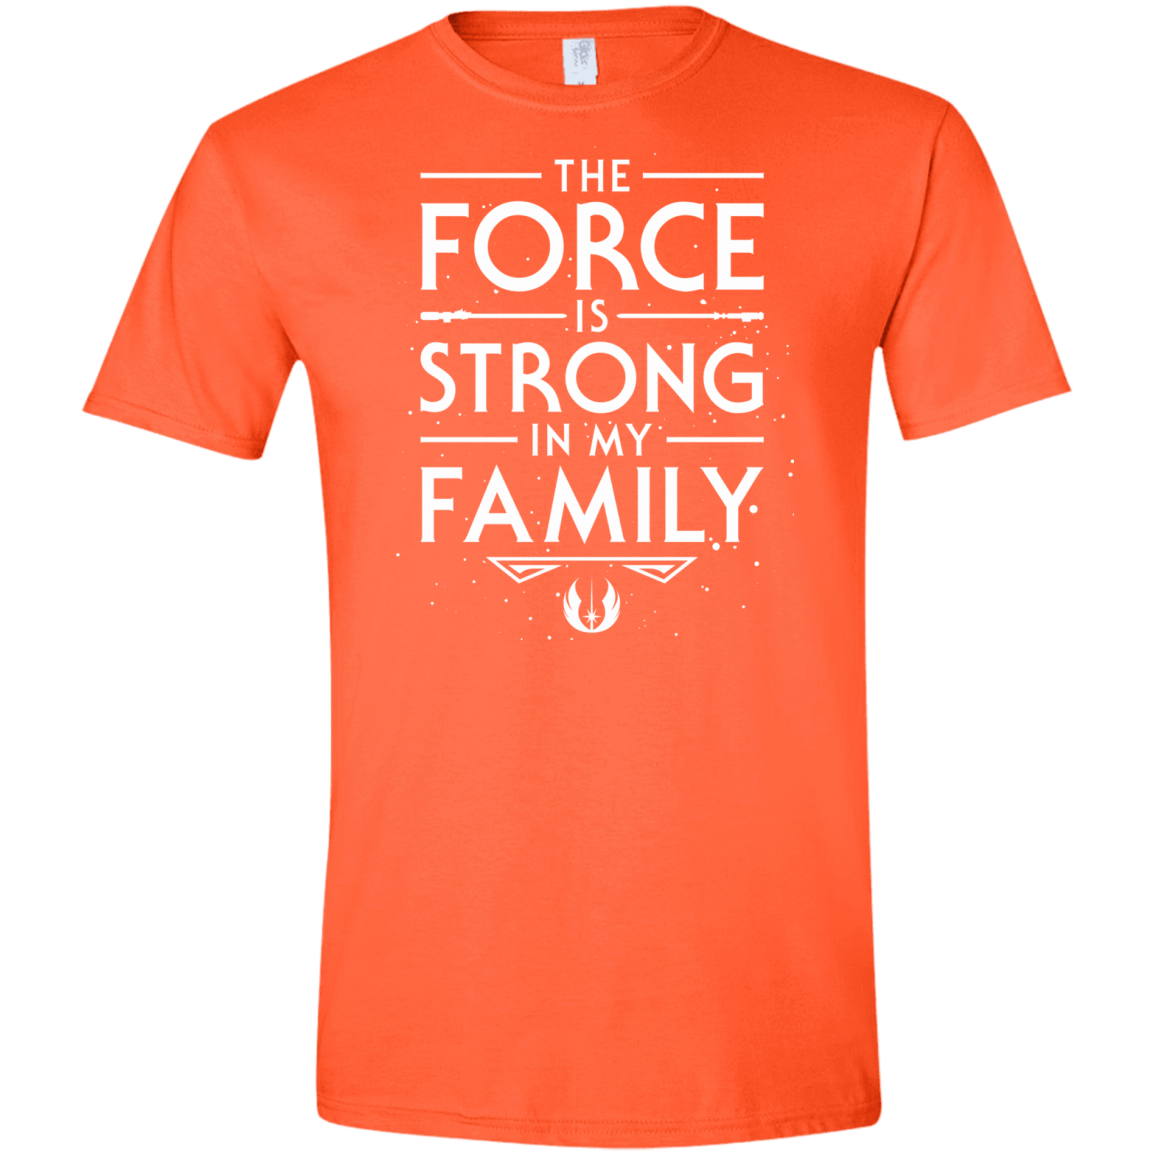 T-Shirts Orange / S The Force is Strong in my Family Men's Semi-Fitted Softstyle